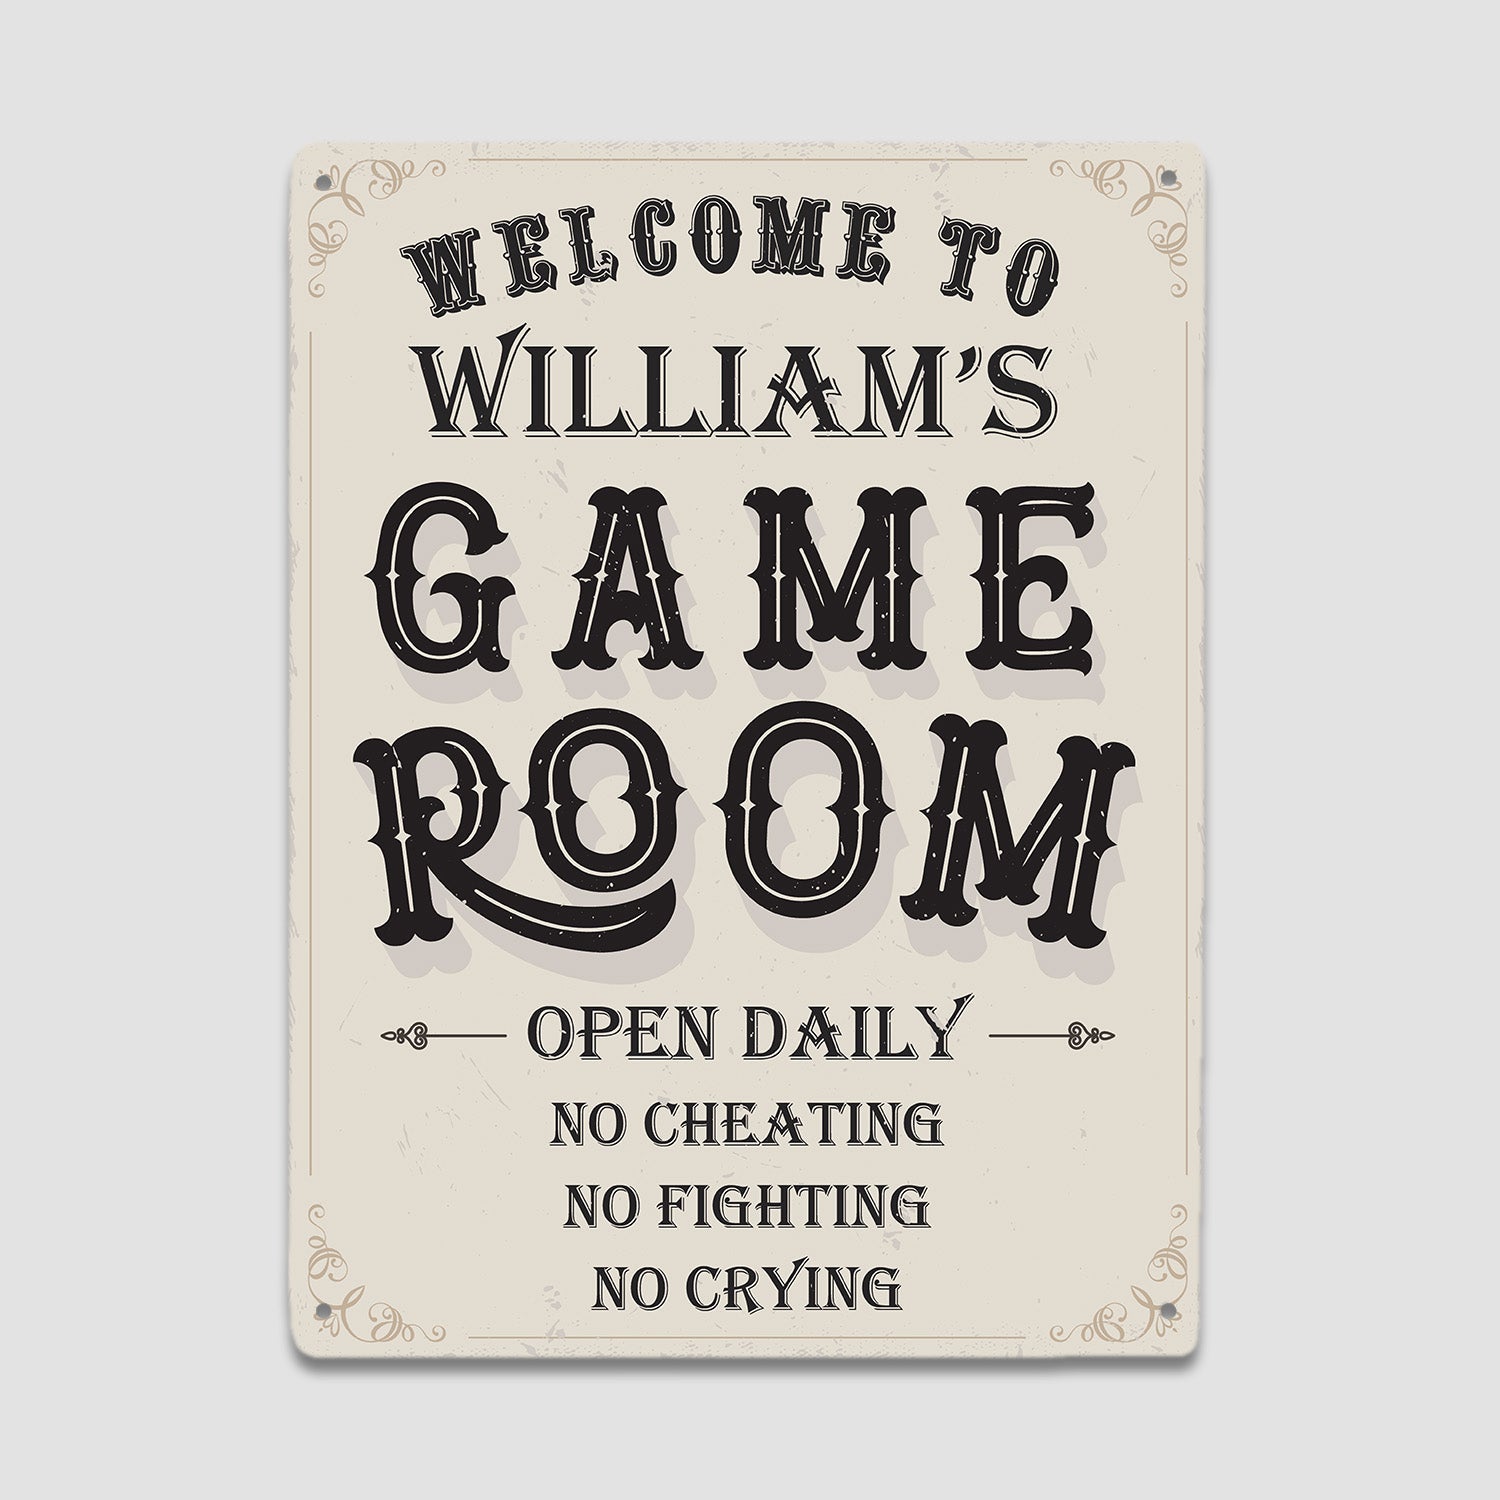 Welcome To Game Room, Custom Metal Signs